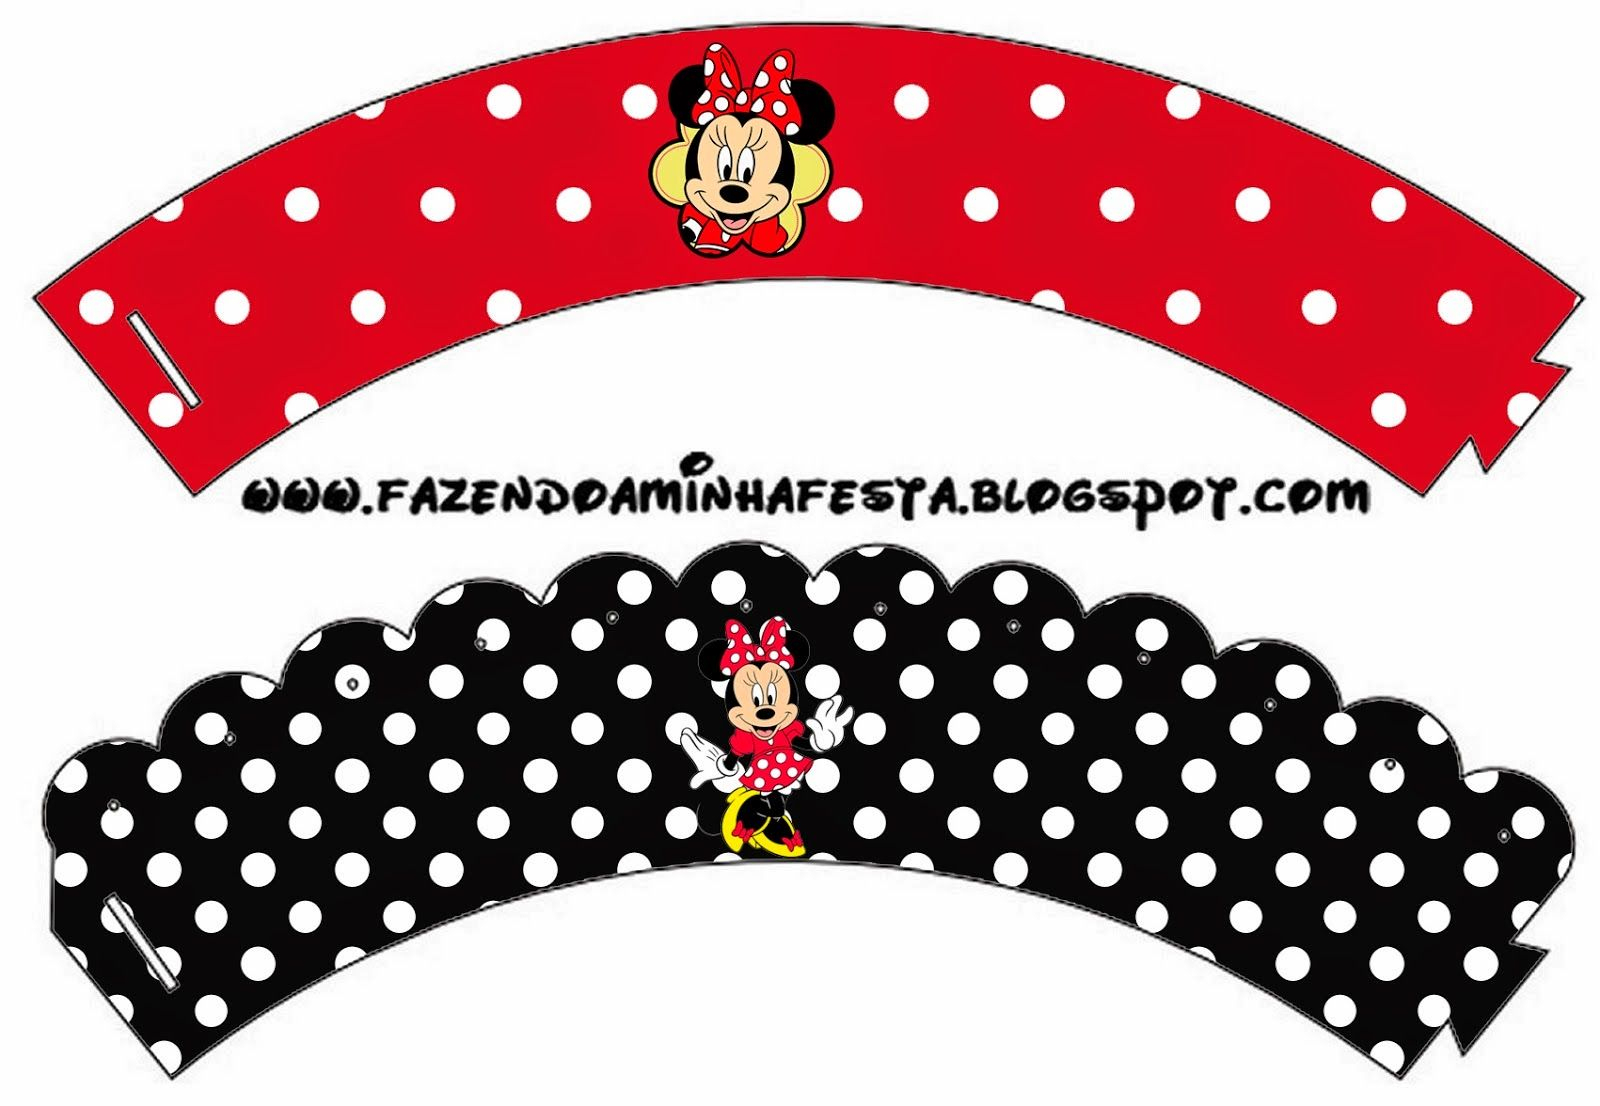 Free Printable Cupcake Wrappers. | C Cupcakes | Printables, Party - Free Printable Minnie Mouse Cupcake Wrappers